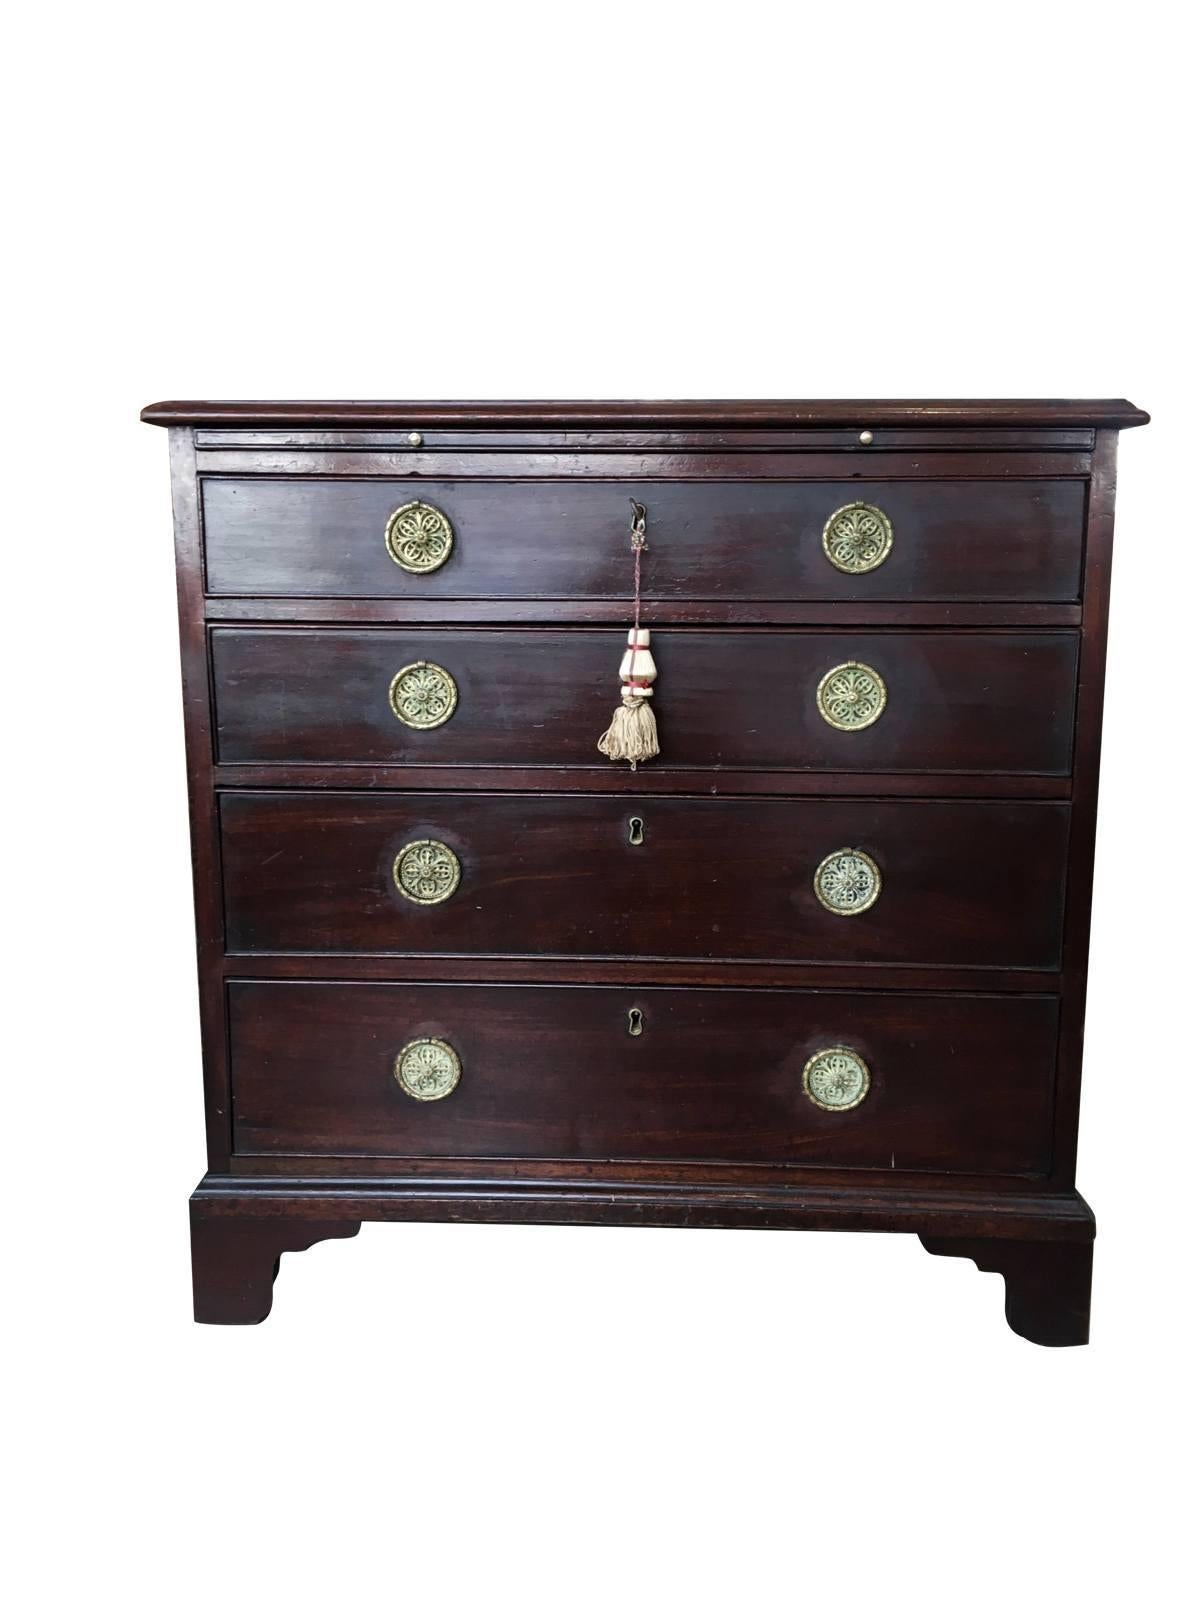 Exceptional quality George III 18th century English Chippendale Cuban mahogany bachelor’s chest, a figured molded top over a pull-out slide and four graduated drawers, full dust-boards, secondary wood primarily mahogany, the unusual, beautiful